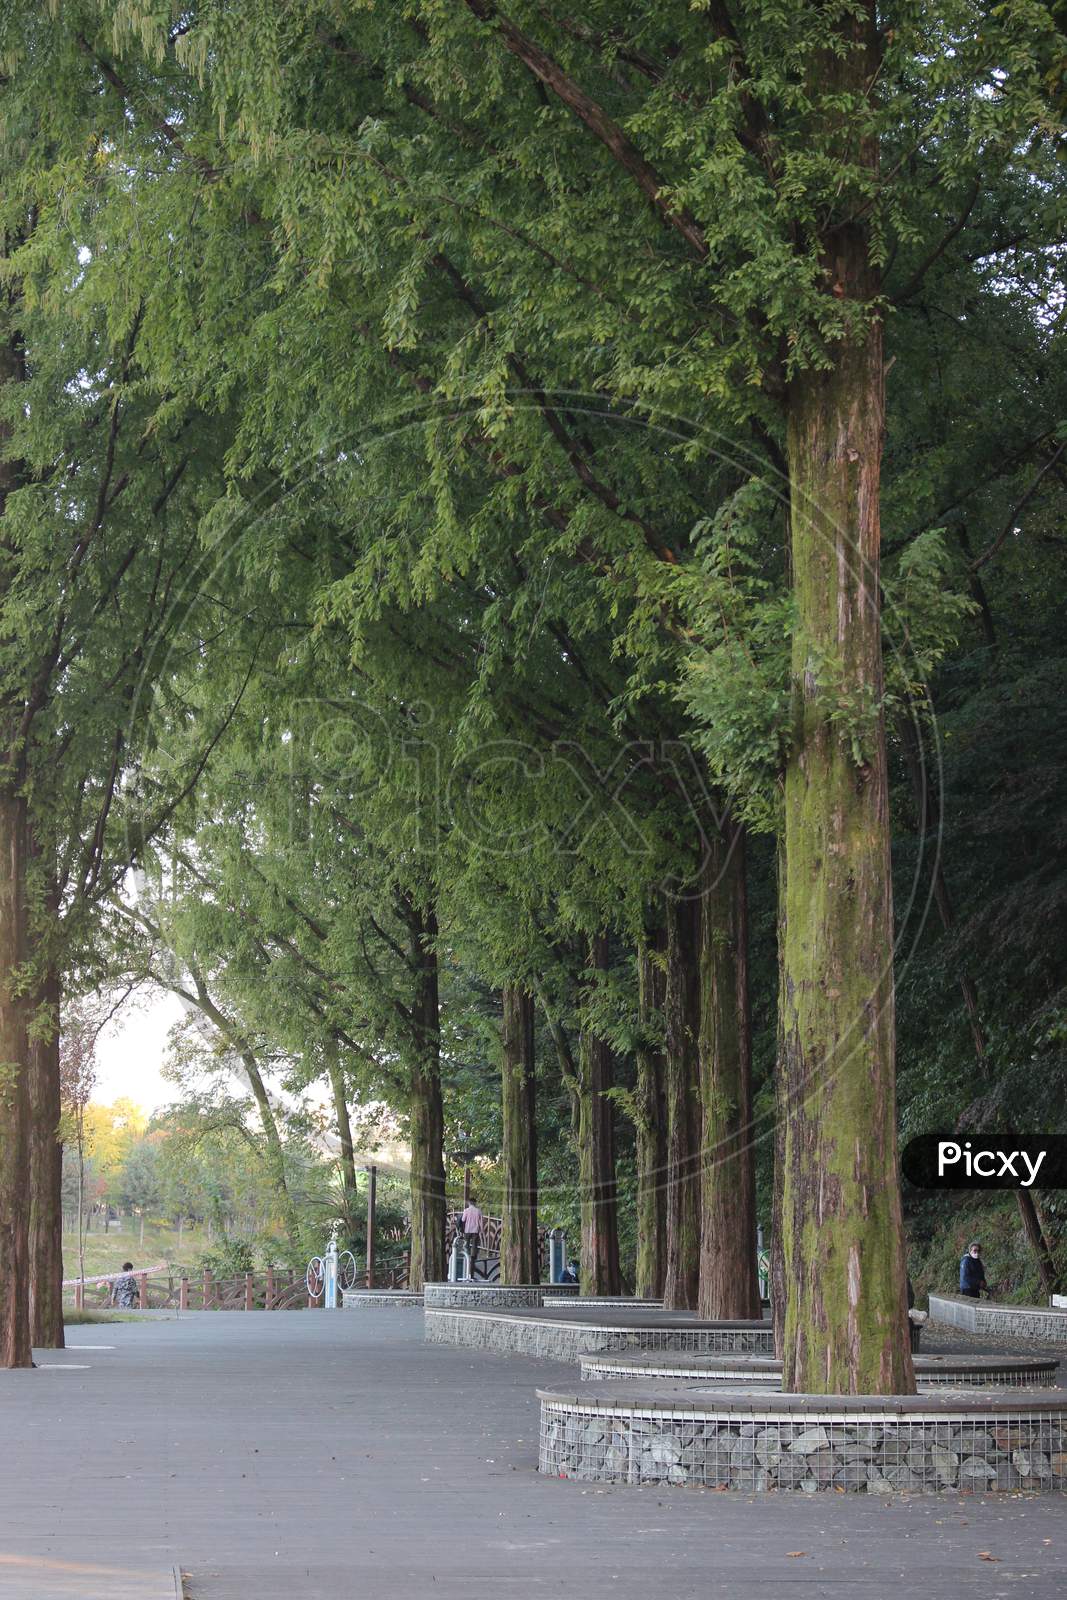 Paved Pedestrian Way Or Walk Way With Trees On Sides For Public Walk